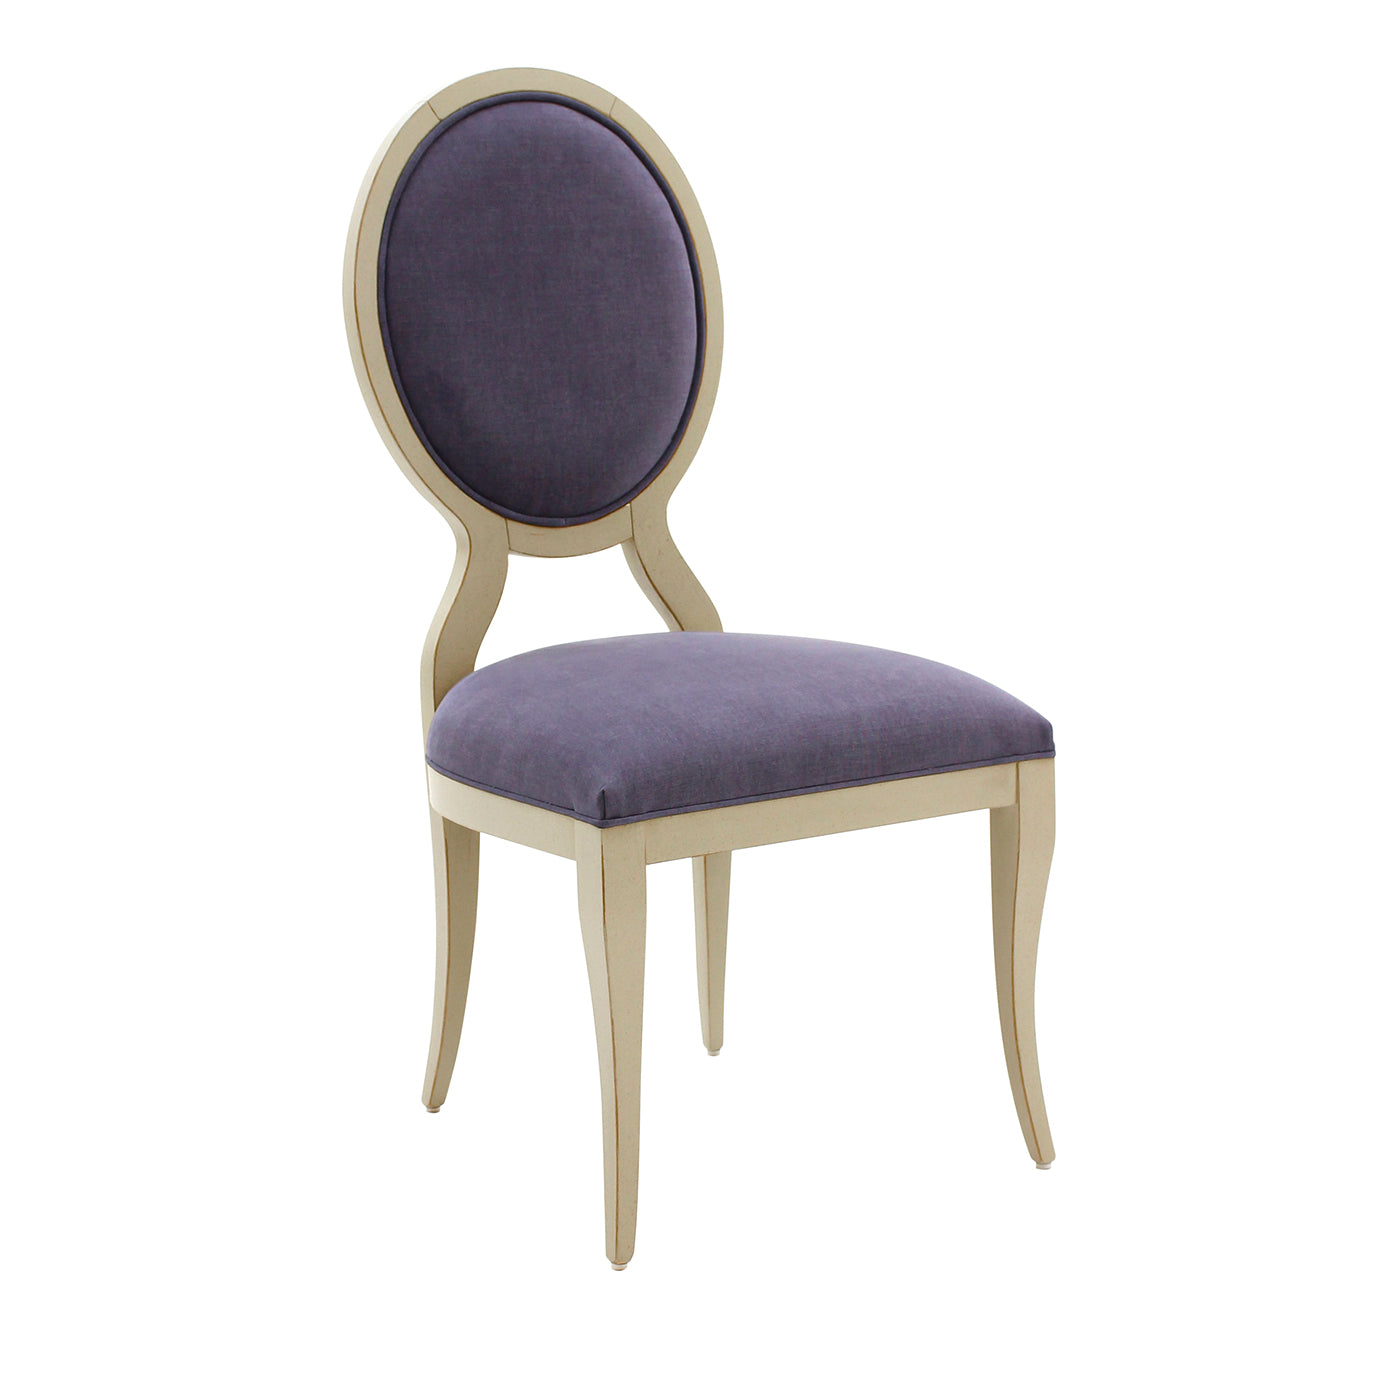 Set of 2 White and Antiqued Blue Chairs - Main view